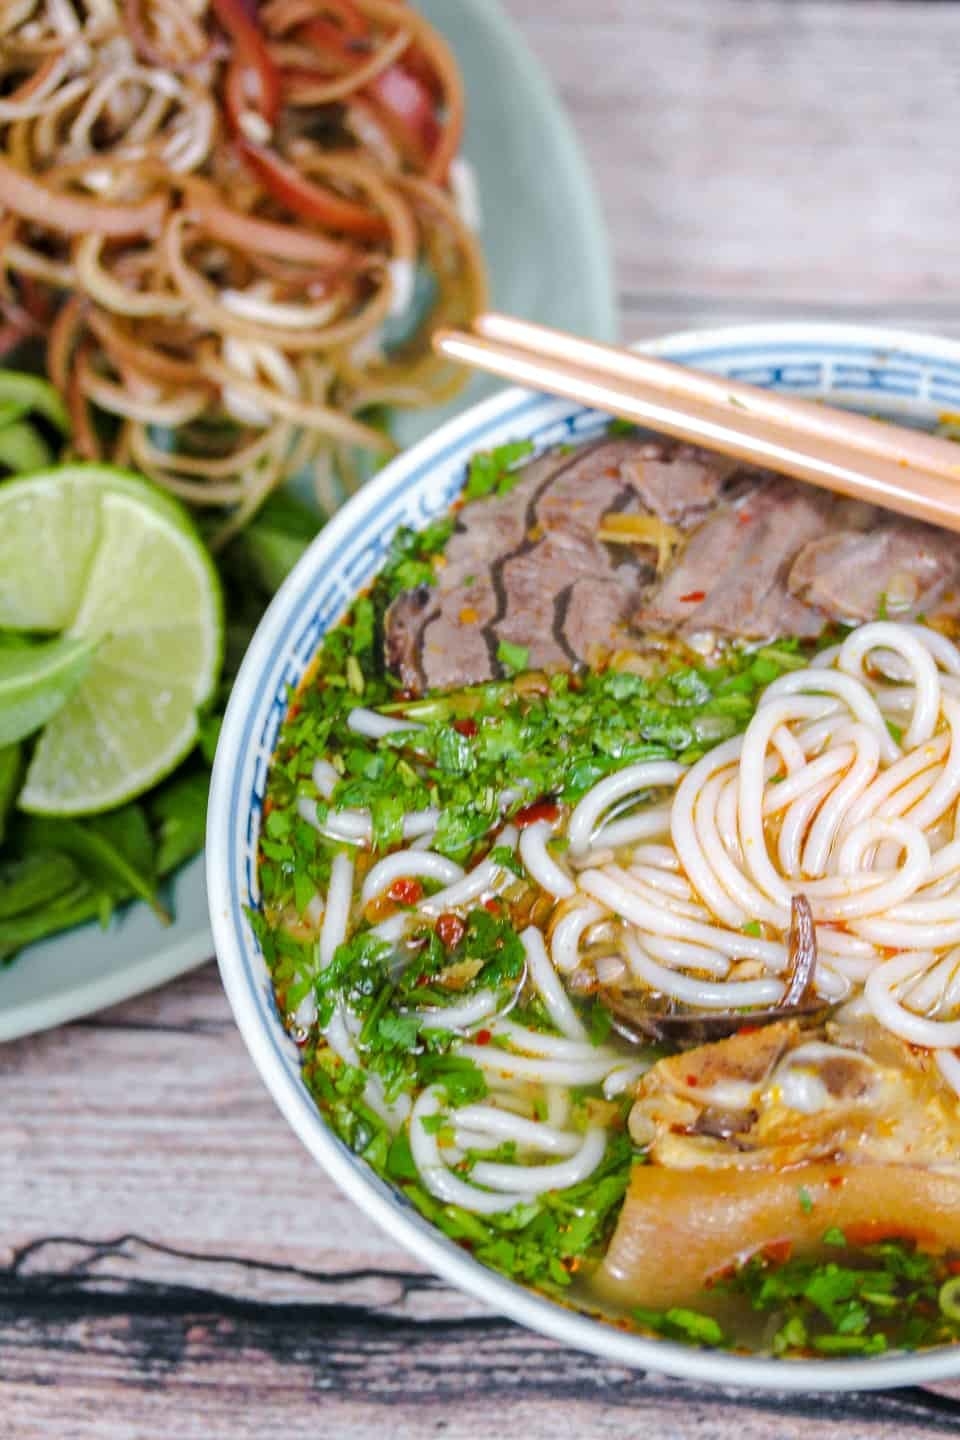 16 Soups From Around The World You Should Try Right Now